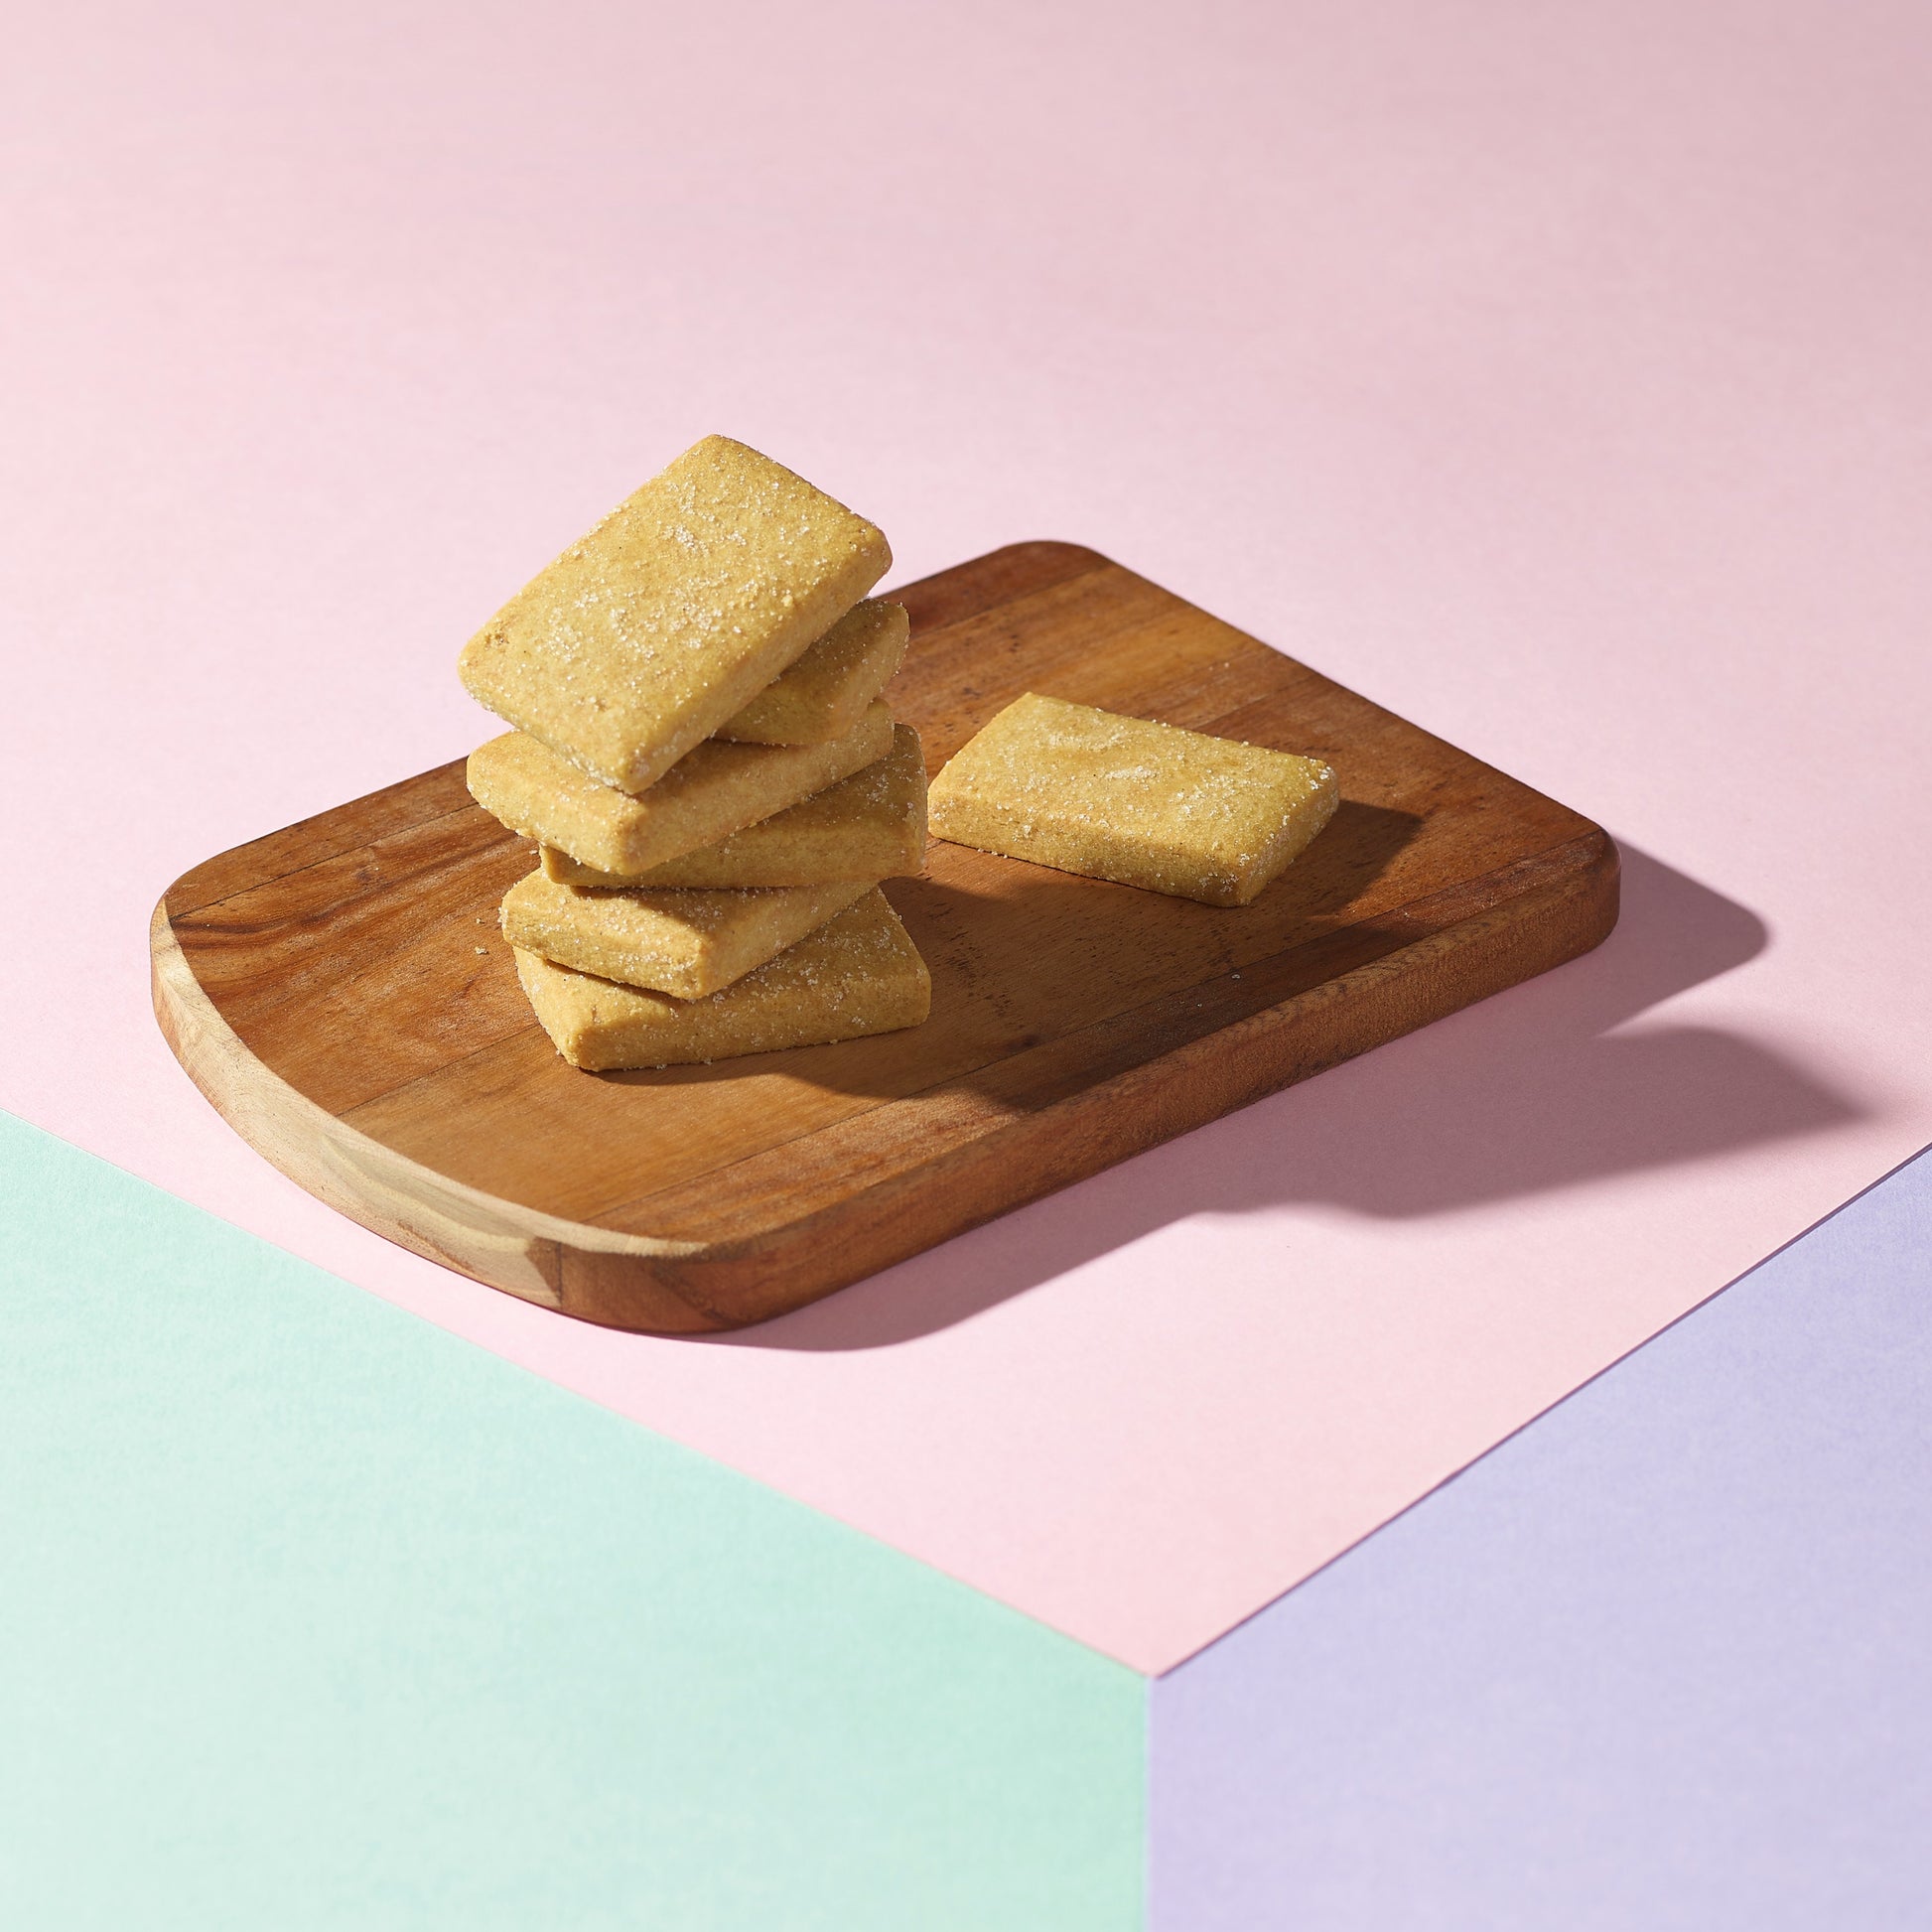 shortbread stacked on wooden board on multicolored background